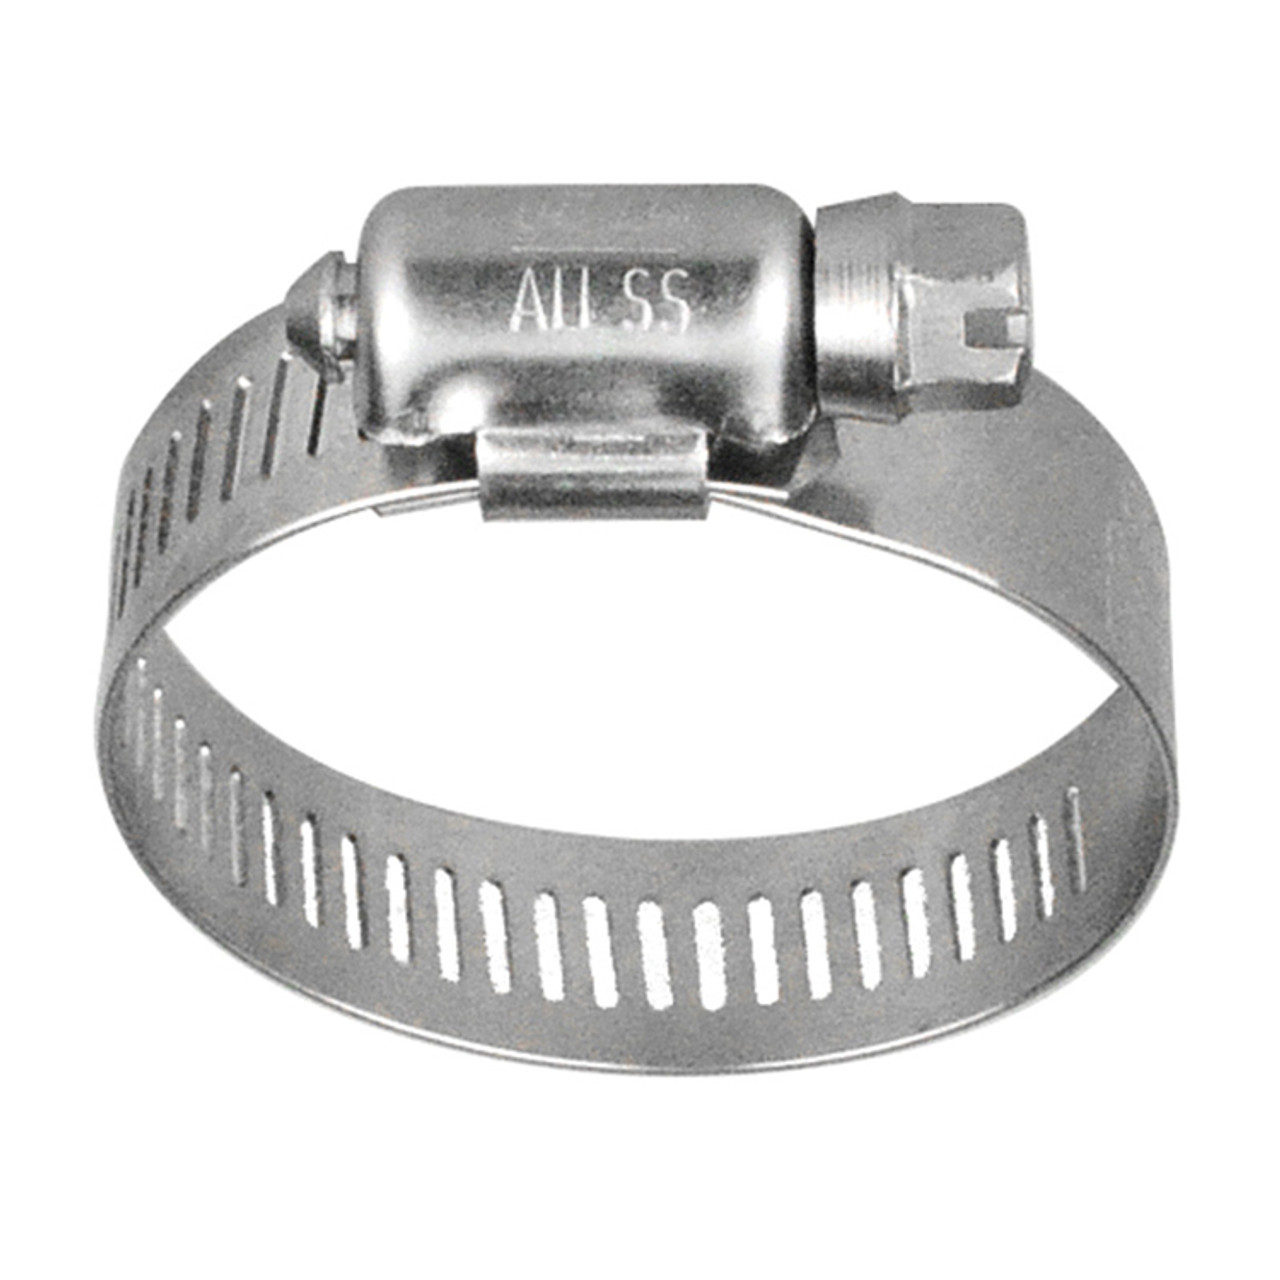 3/8" Stainless Steel Worm Gear Hose Clamp   G8-06